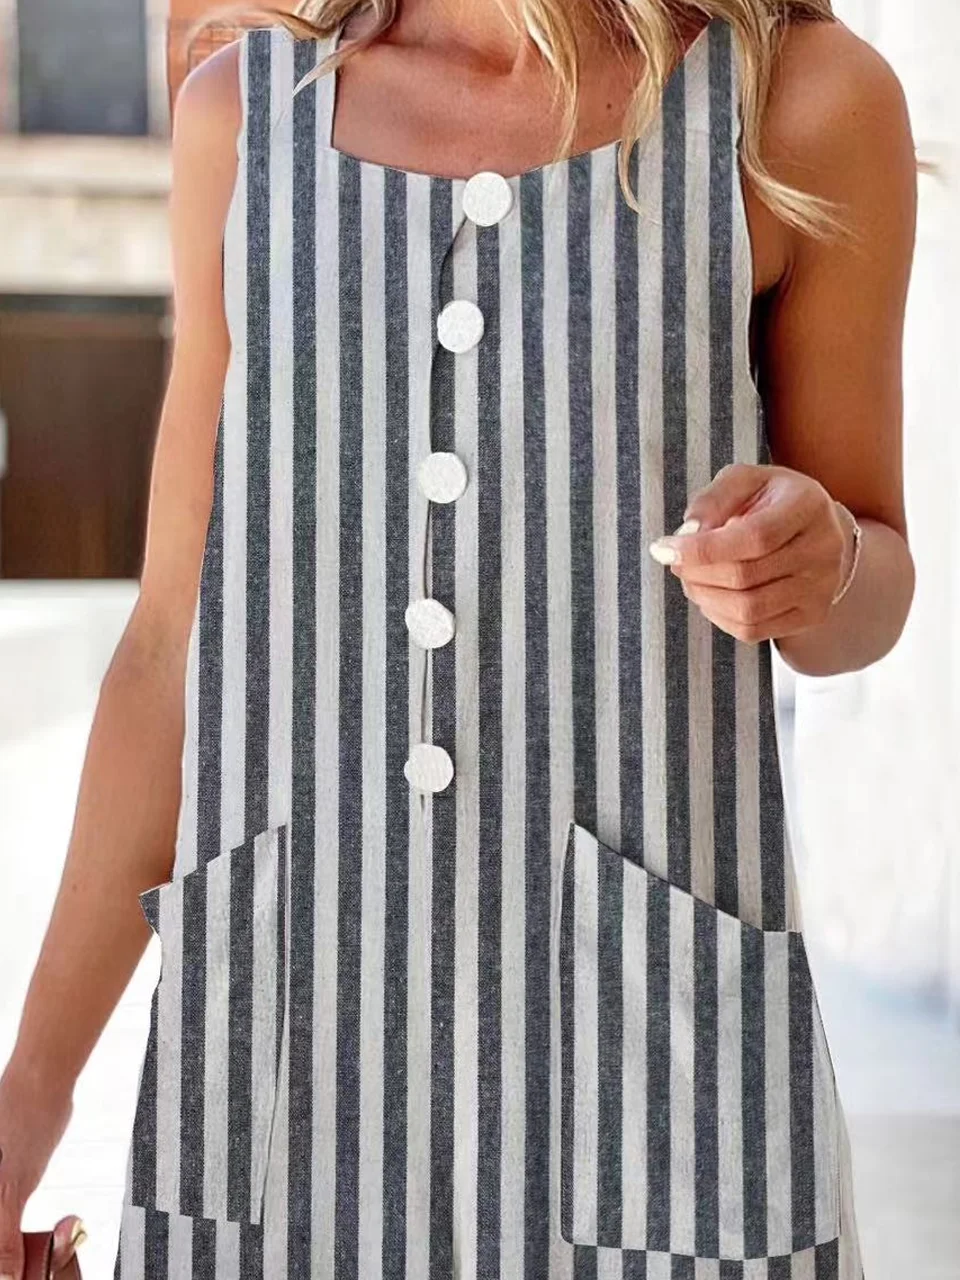 Women Sleeveless Square Neck Loose Shorts Daily Casual Striped Natural Overall Bib Pants